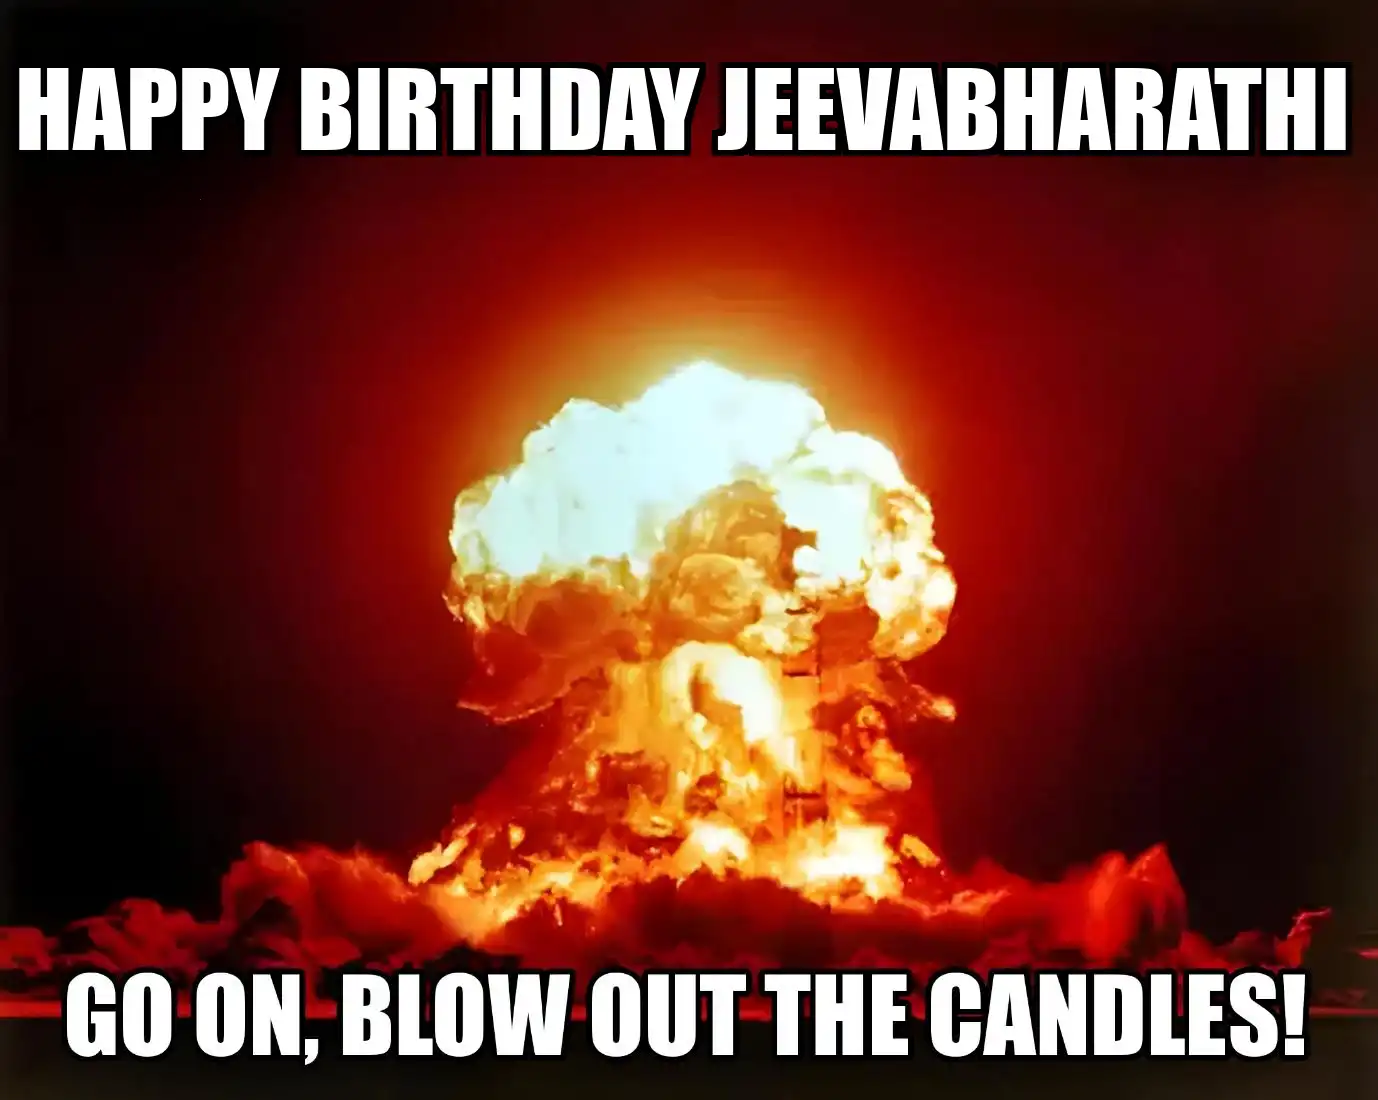 Happy Birthday Jeevabharathi Go On Blow Out The Candles Meme